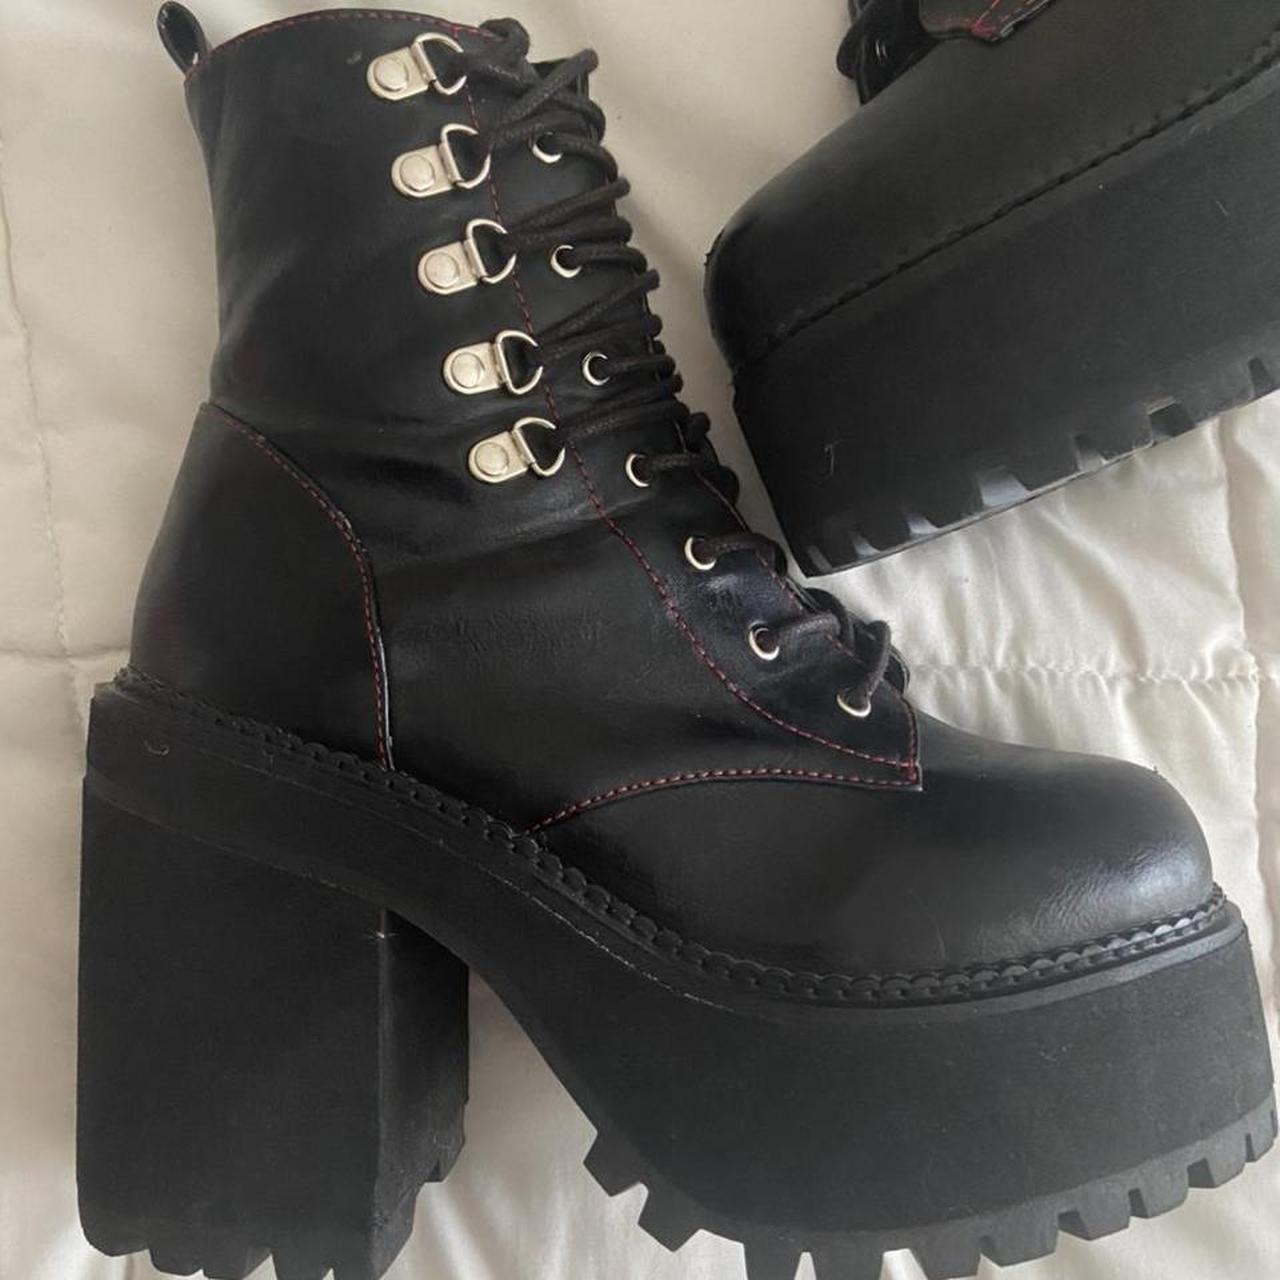 Demonia Women's Black and Red Boots | Depop